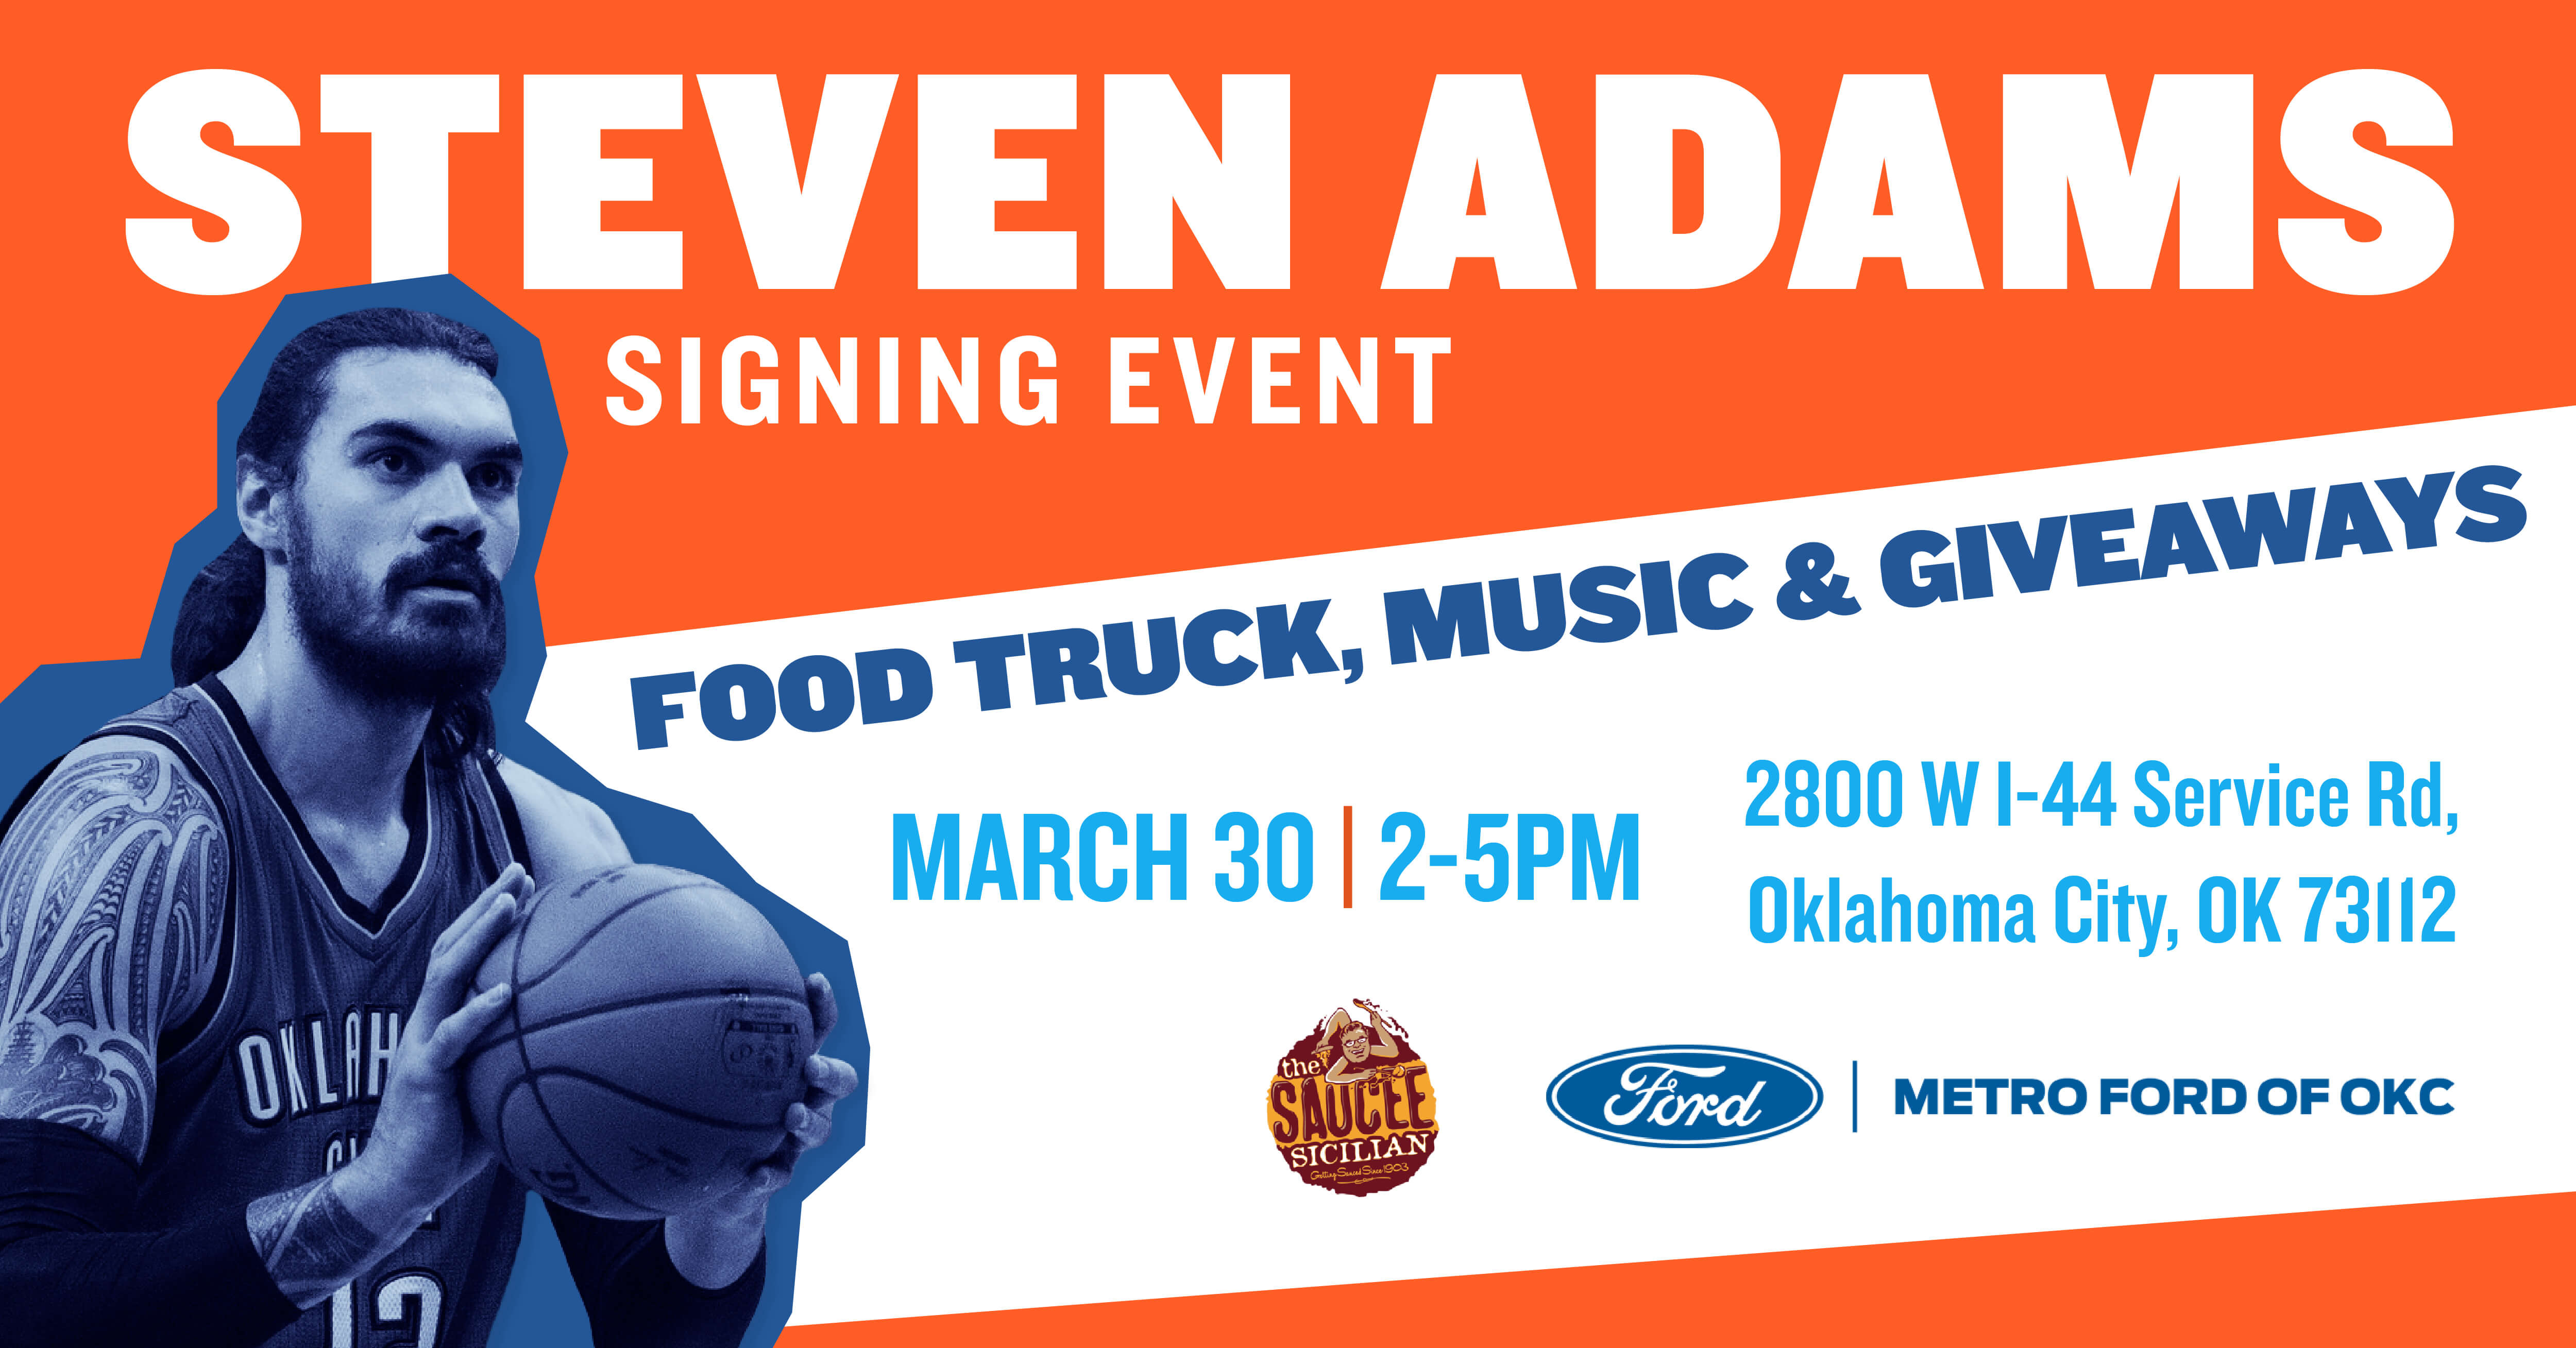 orange and blue steven adams image for event announcement